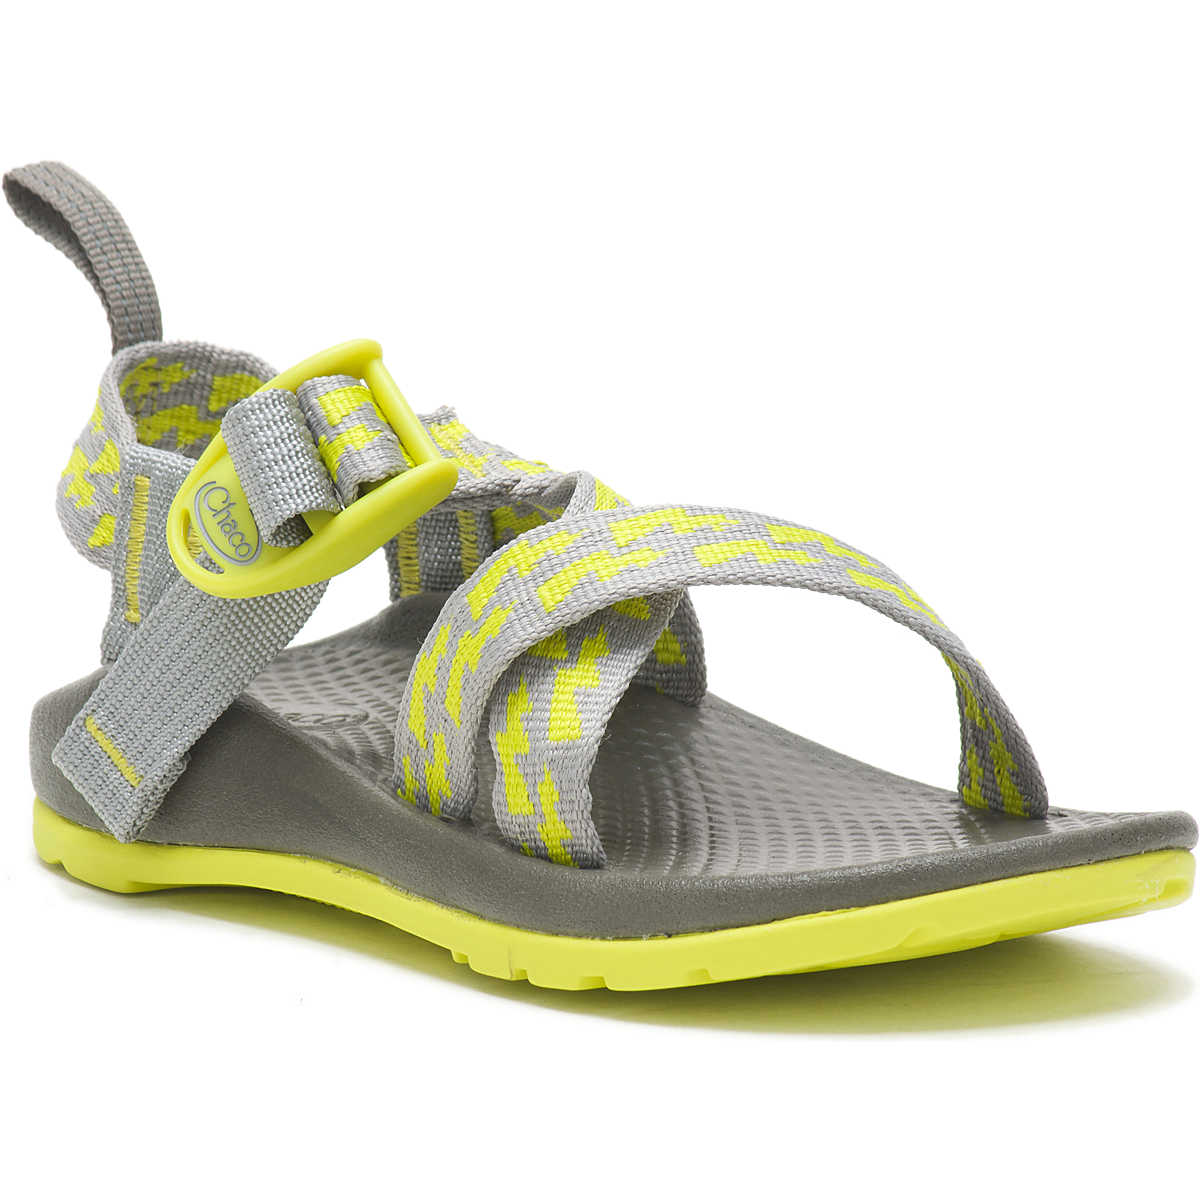 Kid's Z1 Ecotread Sandal by Chaco